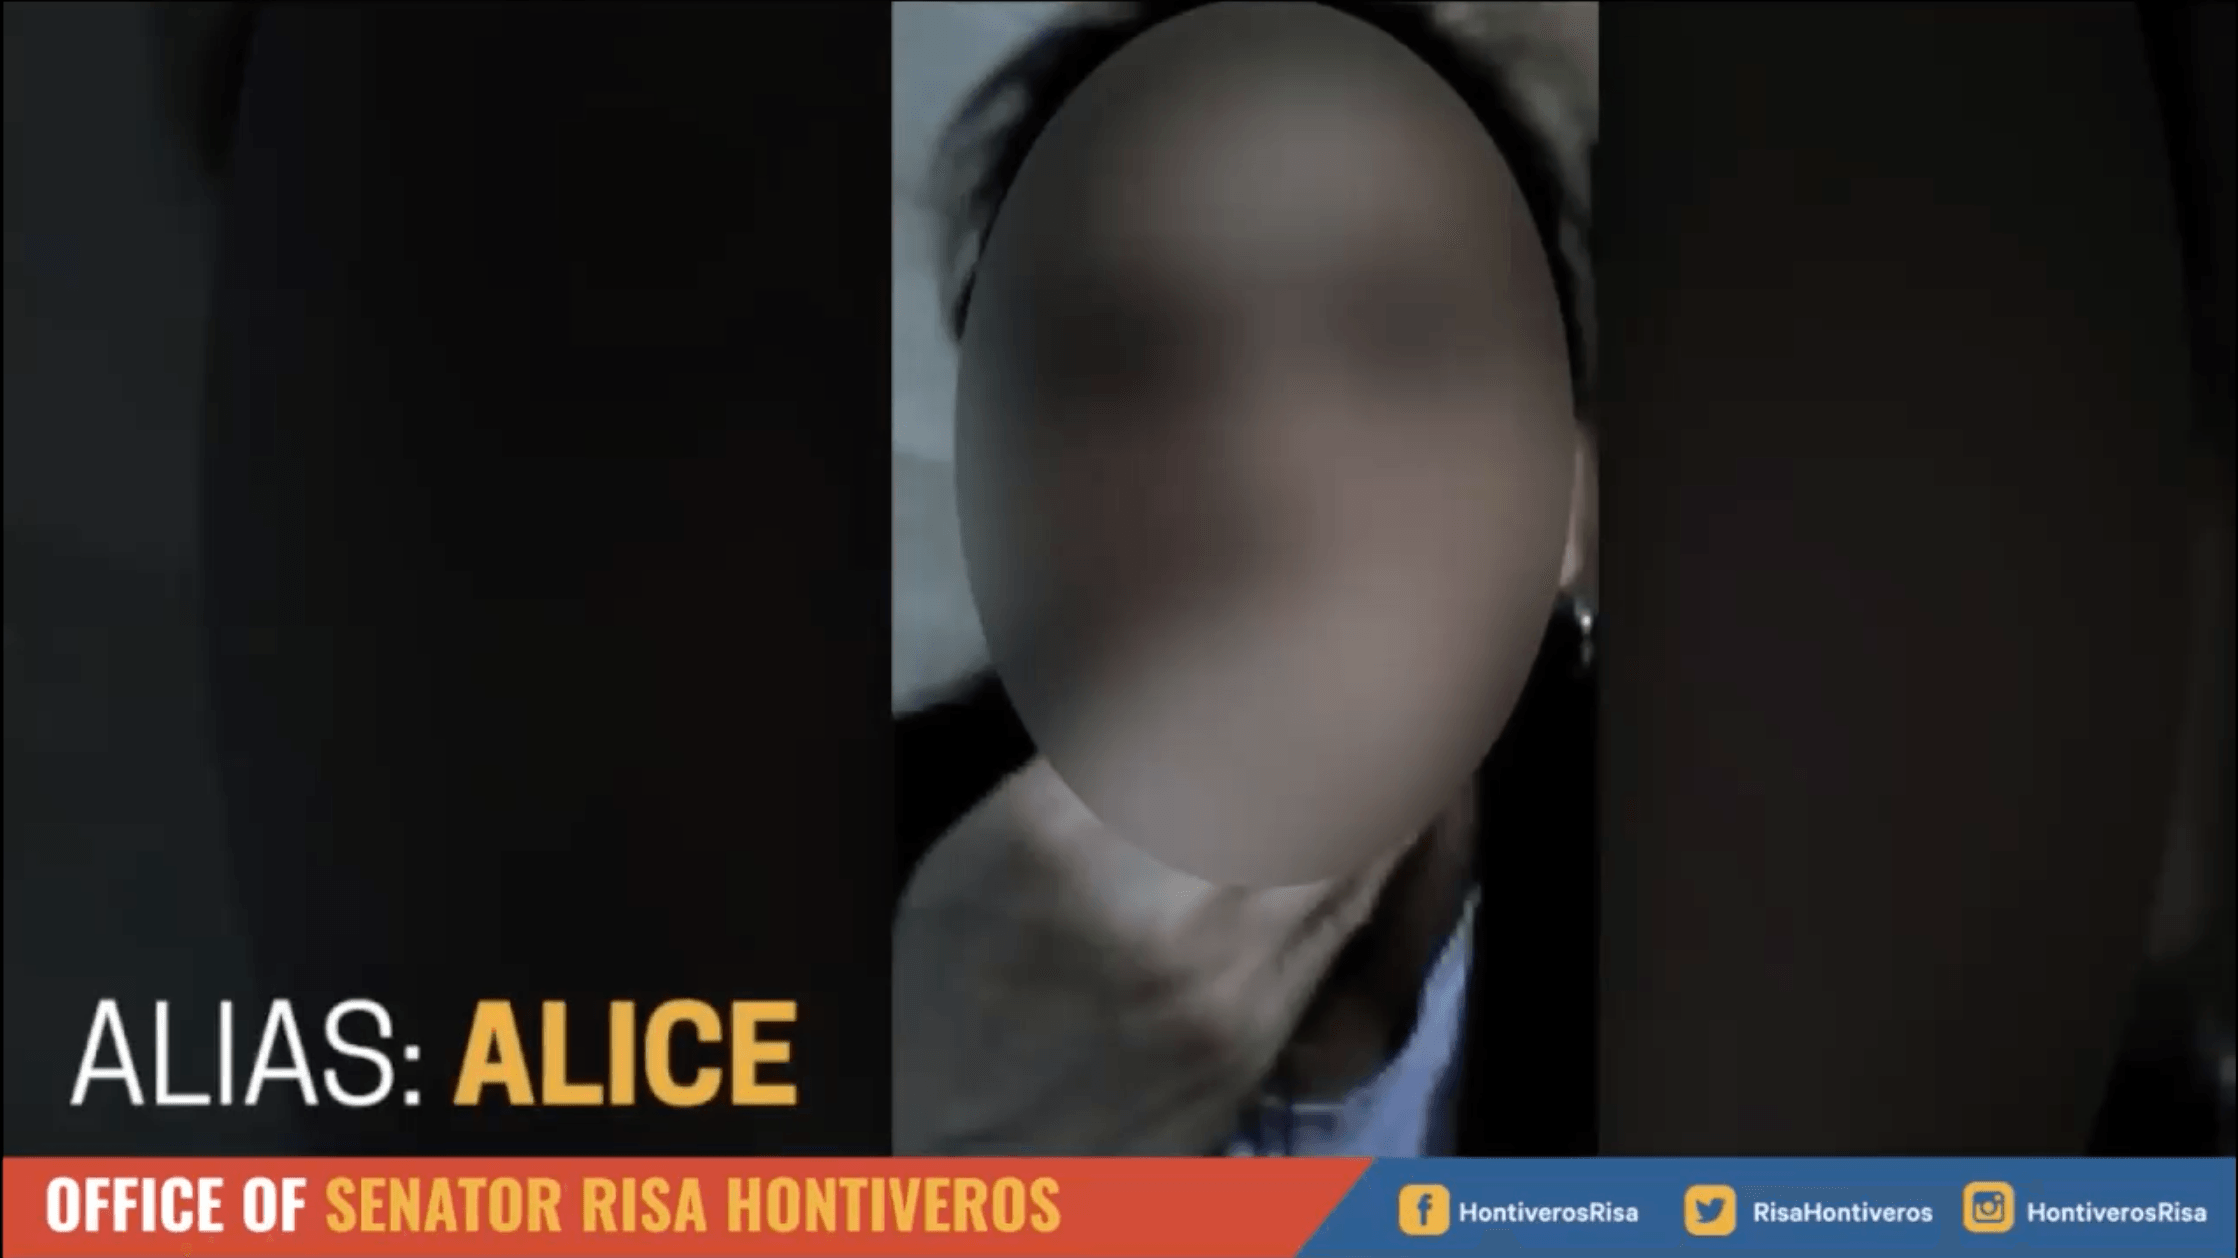 OFW says immigration officers involved in trafficking her to Syria pic